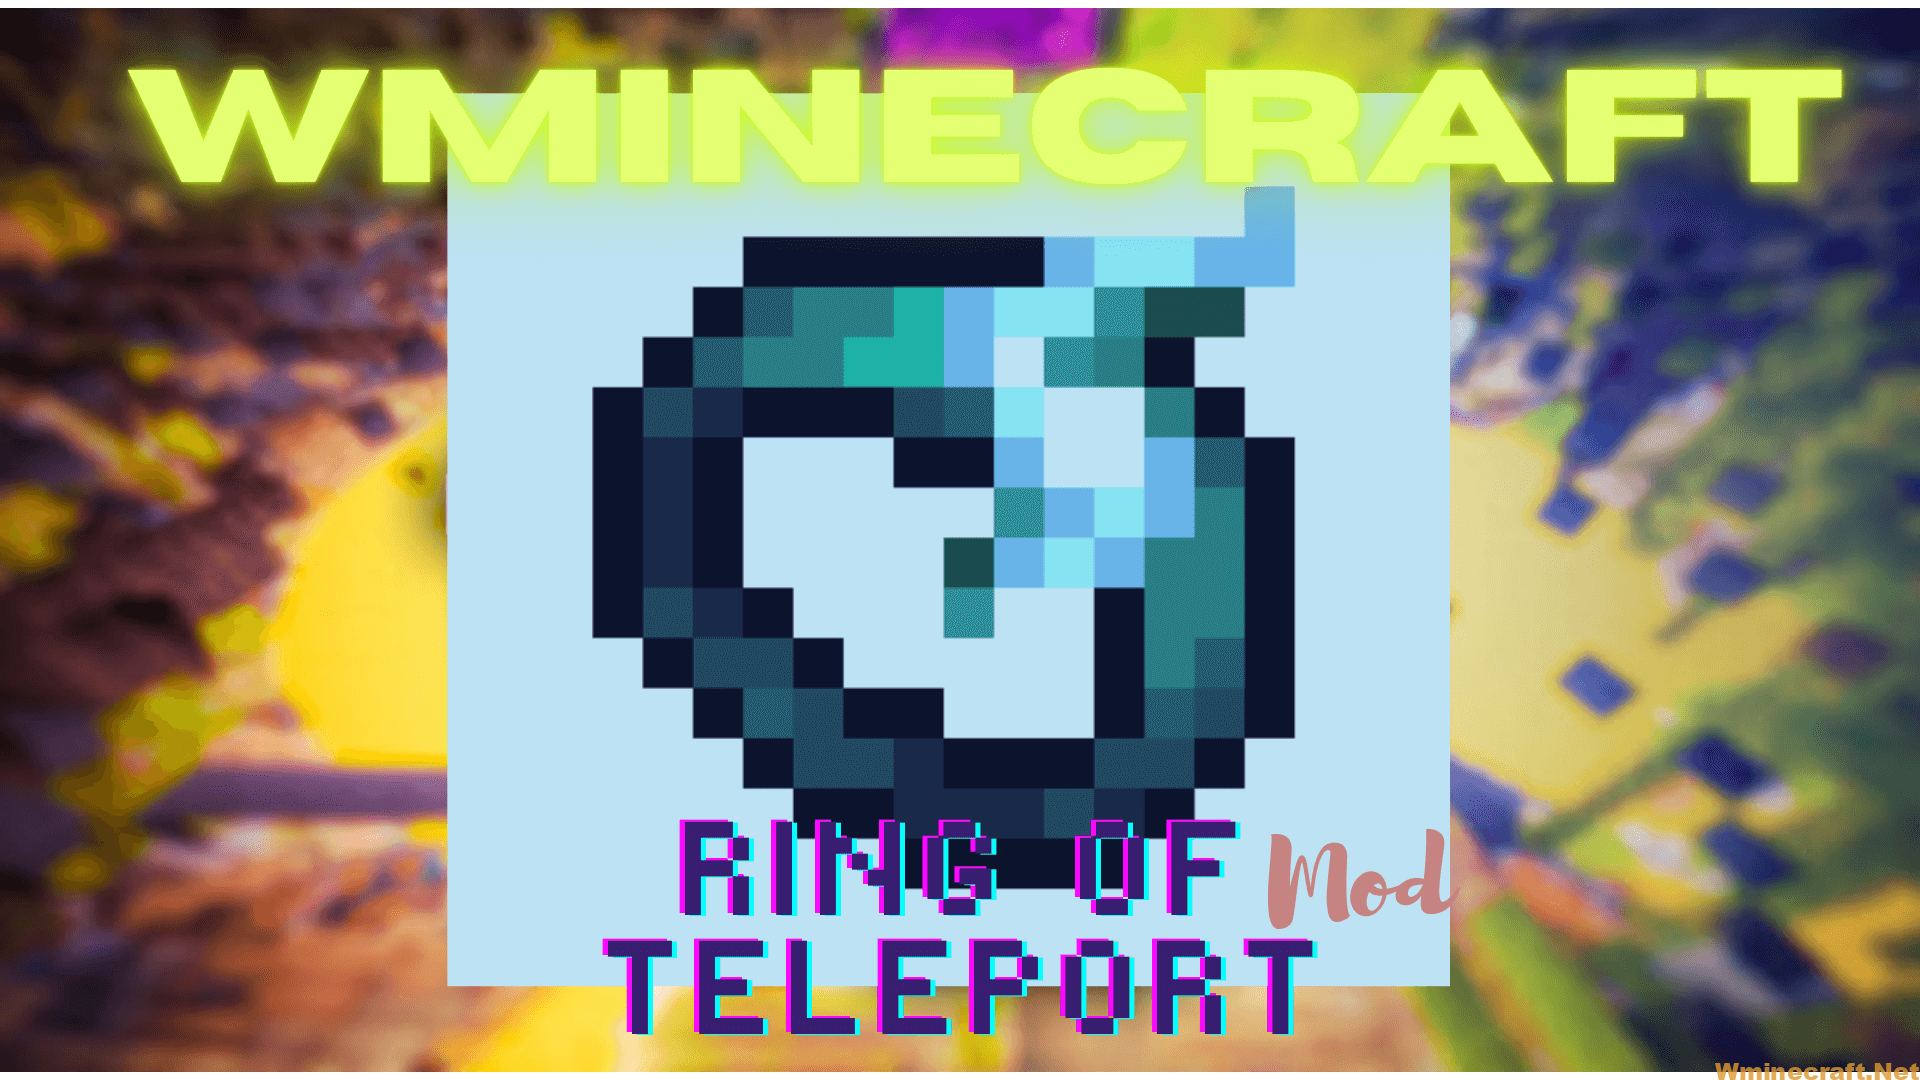 Ring of Teleport Mod